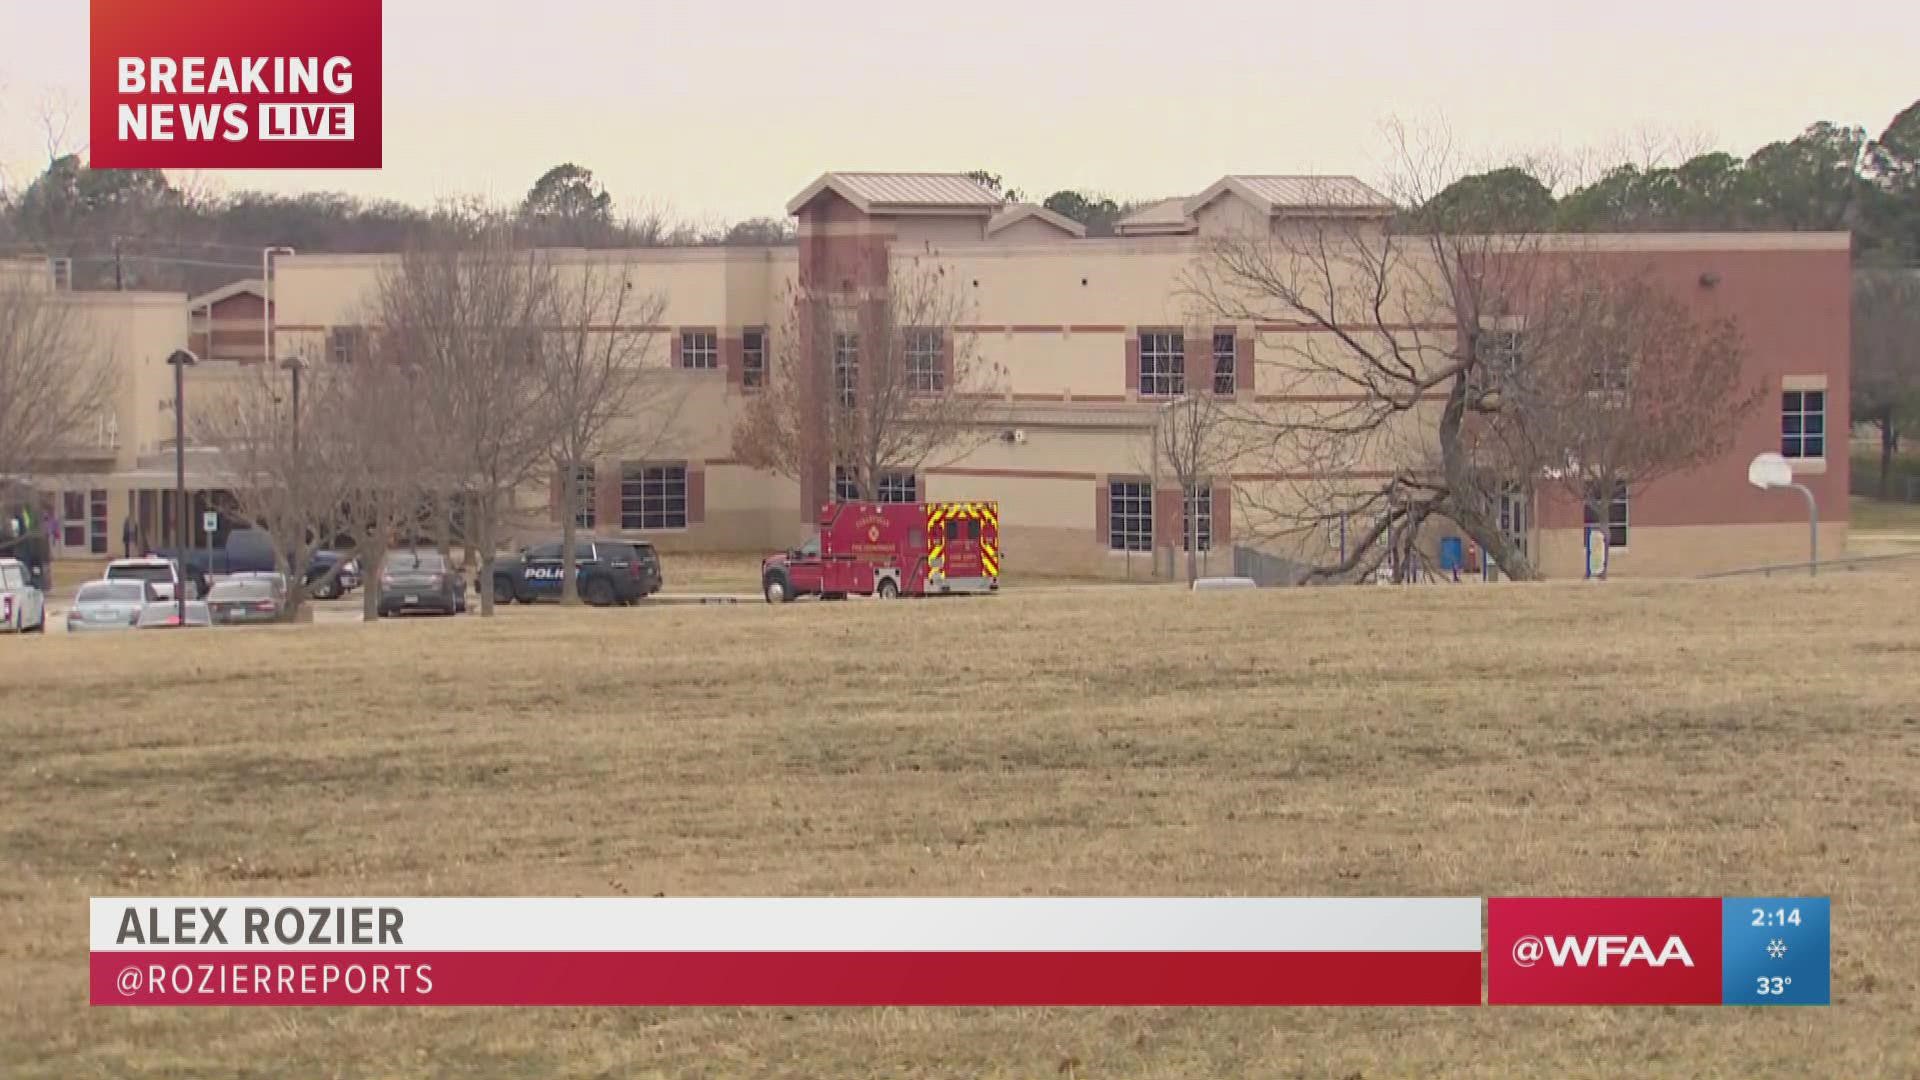 Police and FBI were responding to the Congregation Beth Israel synagogue in Colleyville.